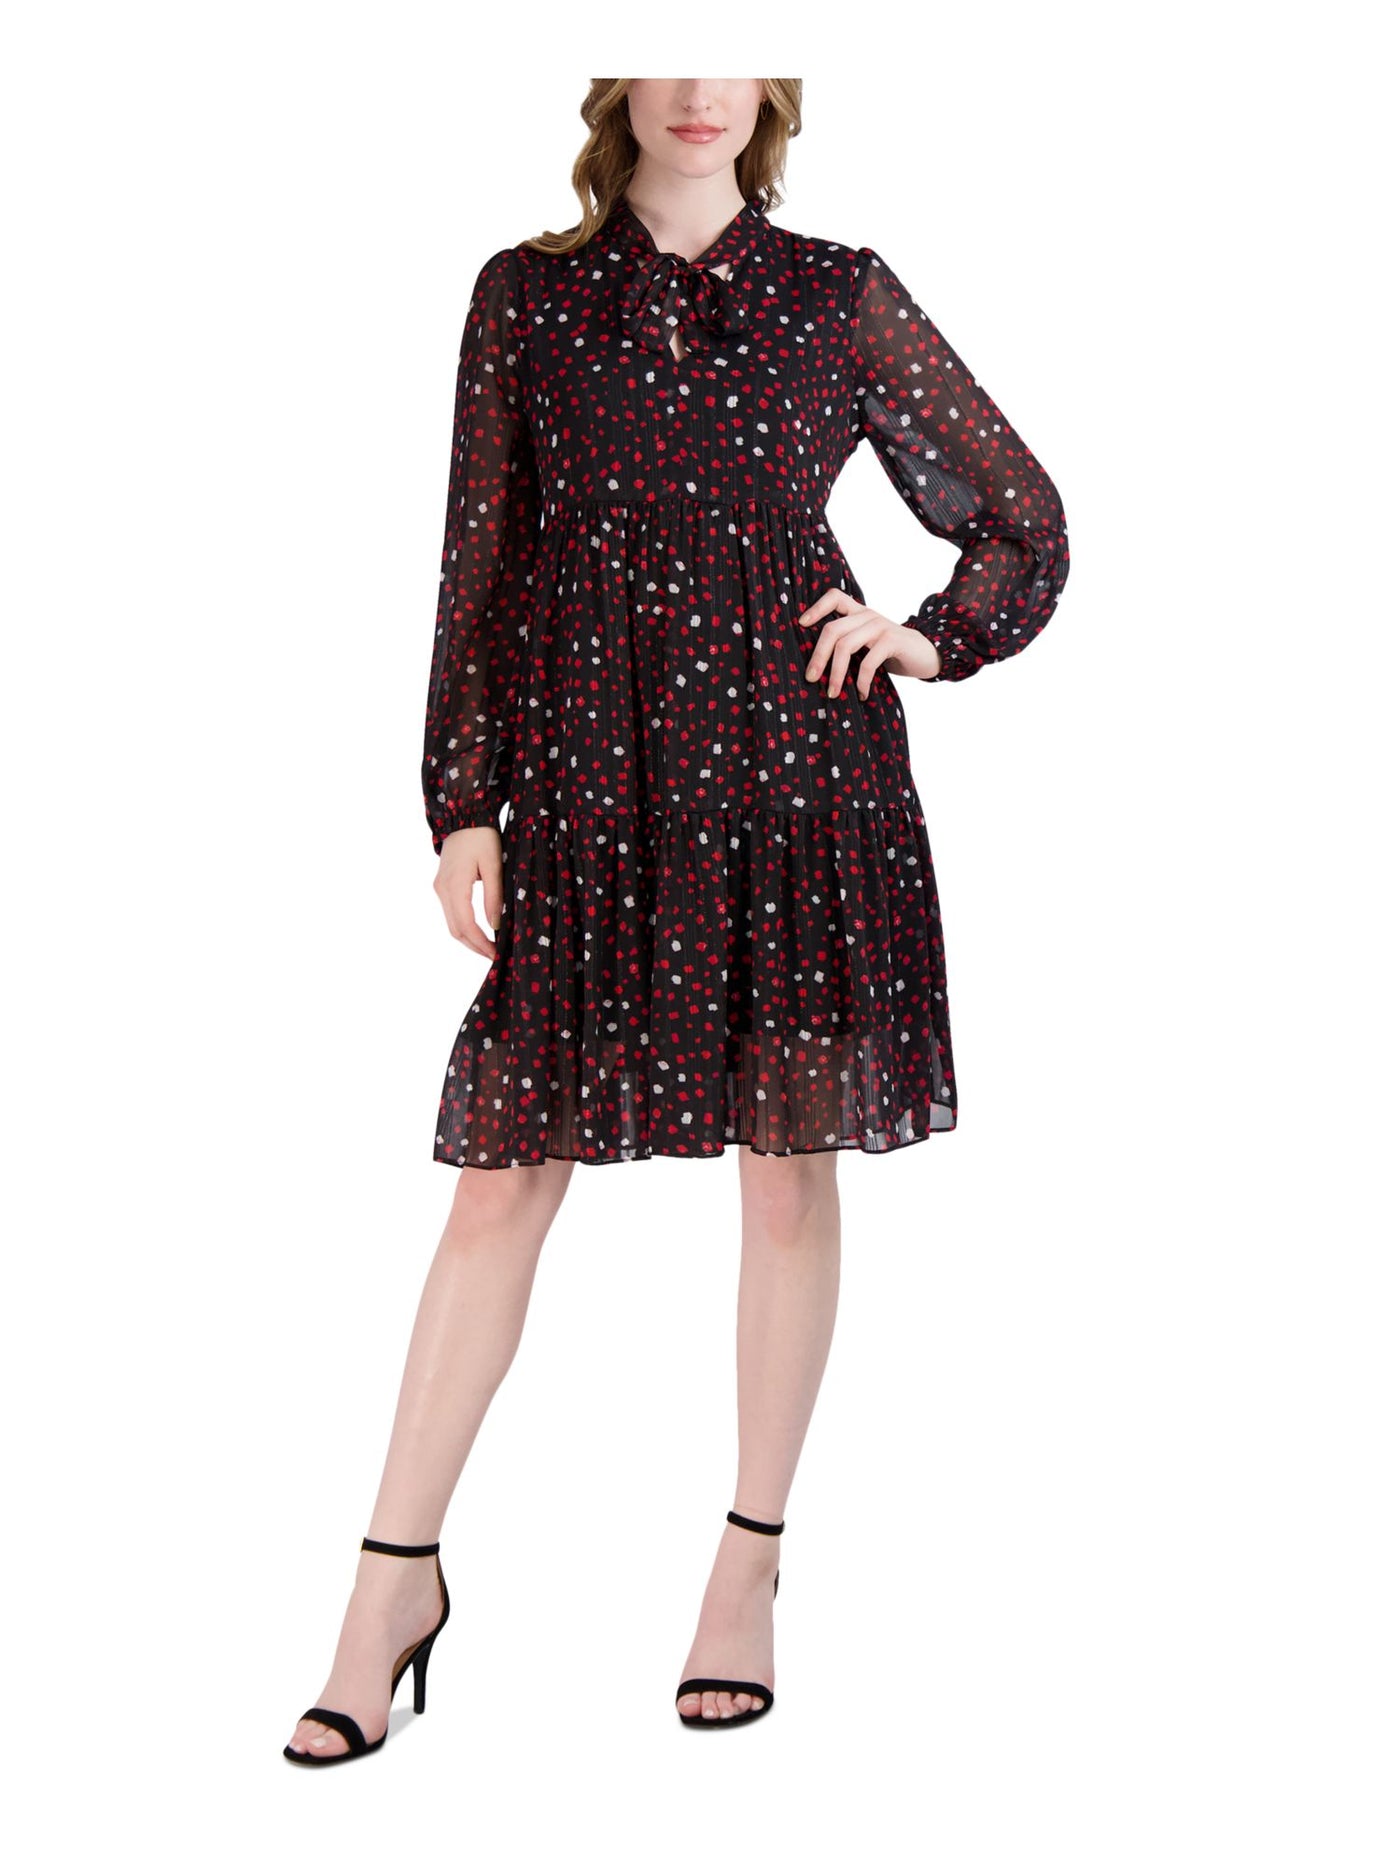 SIGNATURE BY ROBBIE BEE Womens Black Lined Polka Dot Long Sleeve Keyhole Below The Knee Wear To Work Shift Dress Petites PS